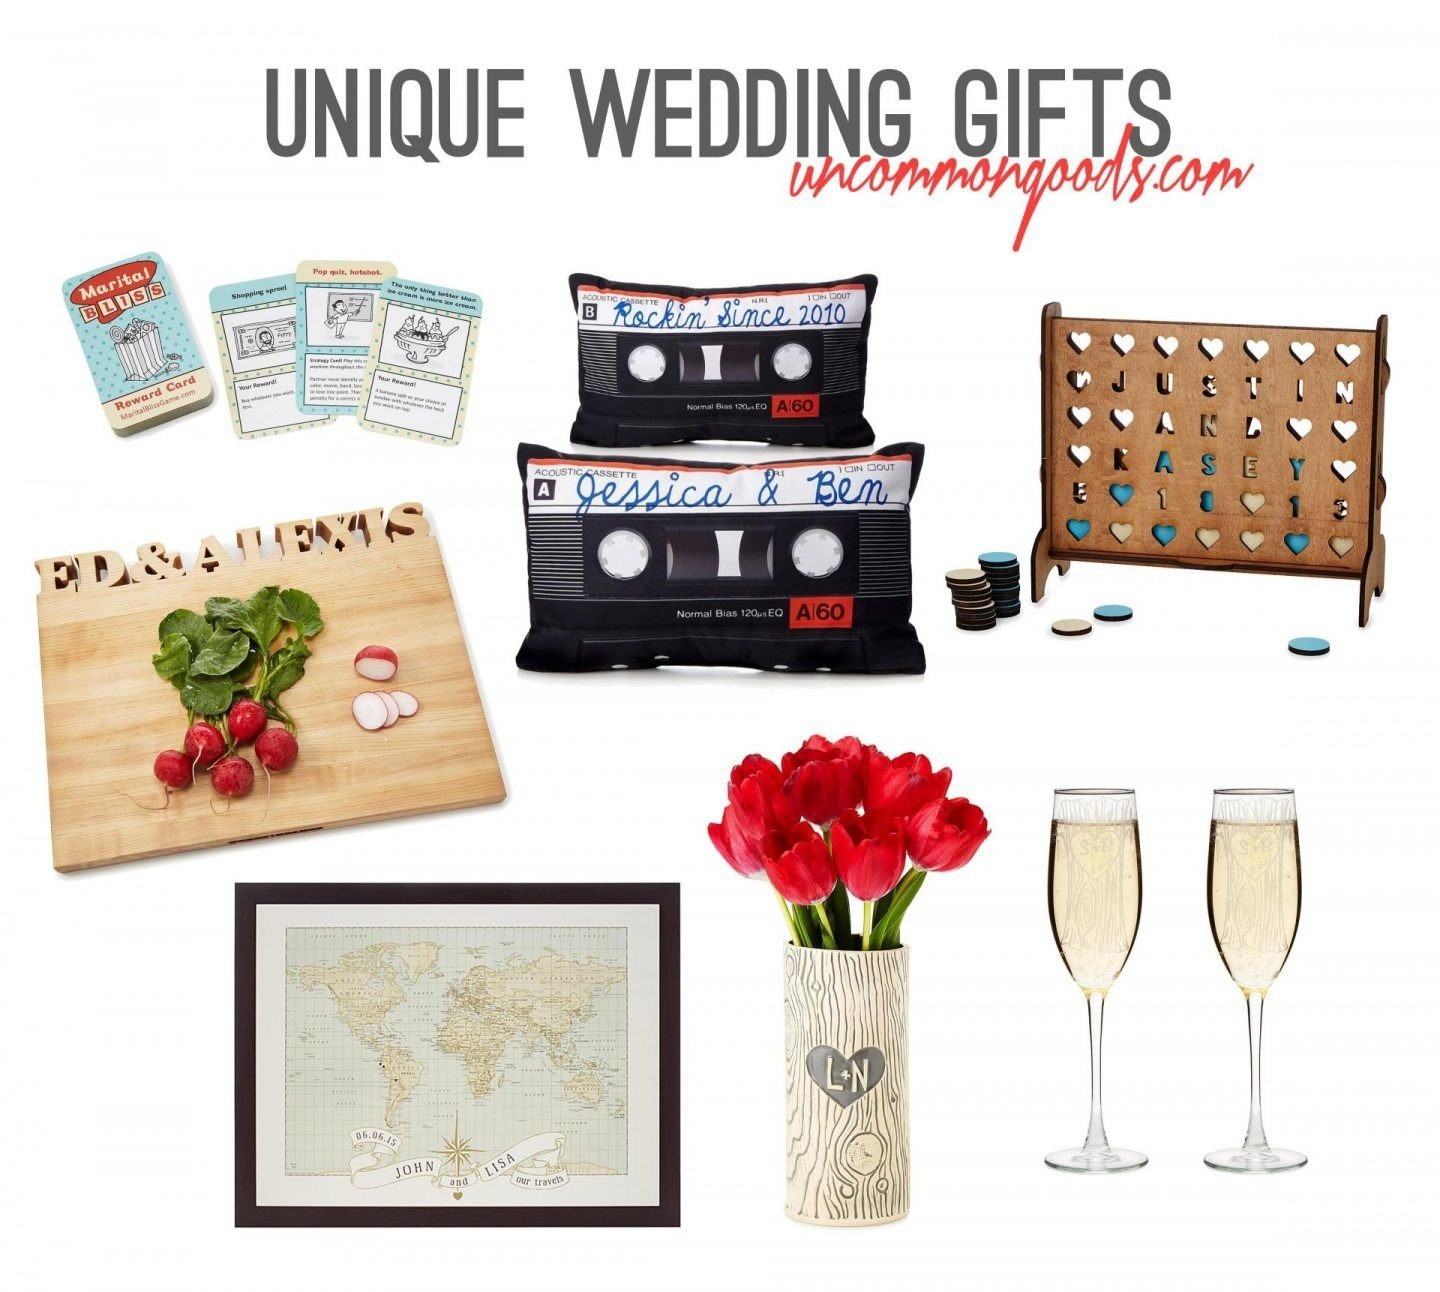 Wedding Gift Ideas For Older Couples Second Marriage
 10 Fashionable Wedding Gift Ideas For Second Marriages 2021